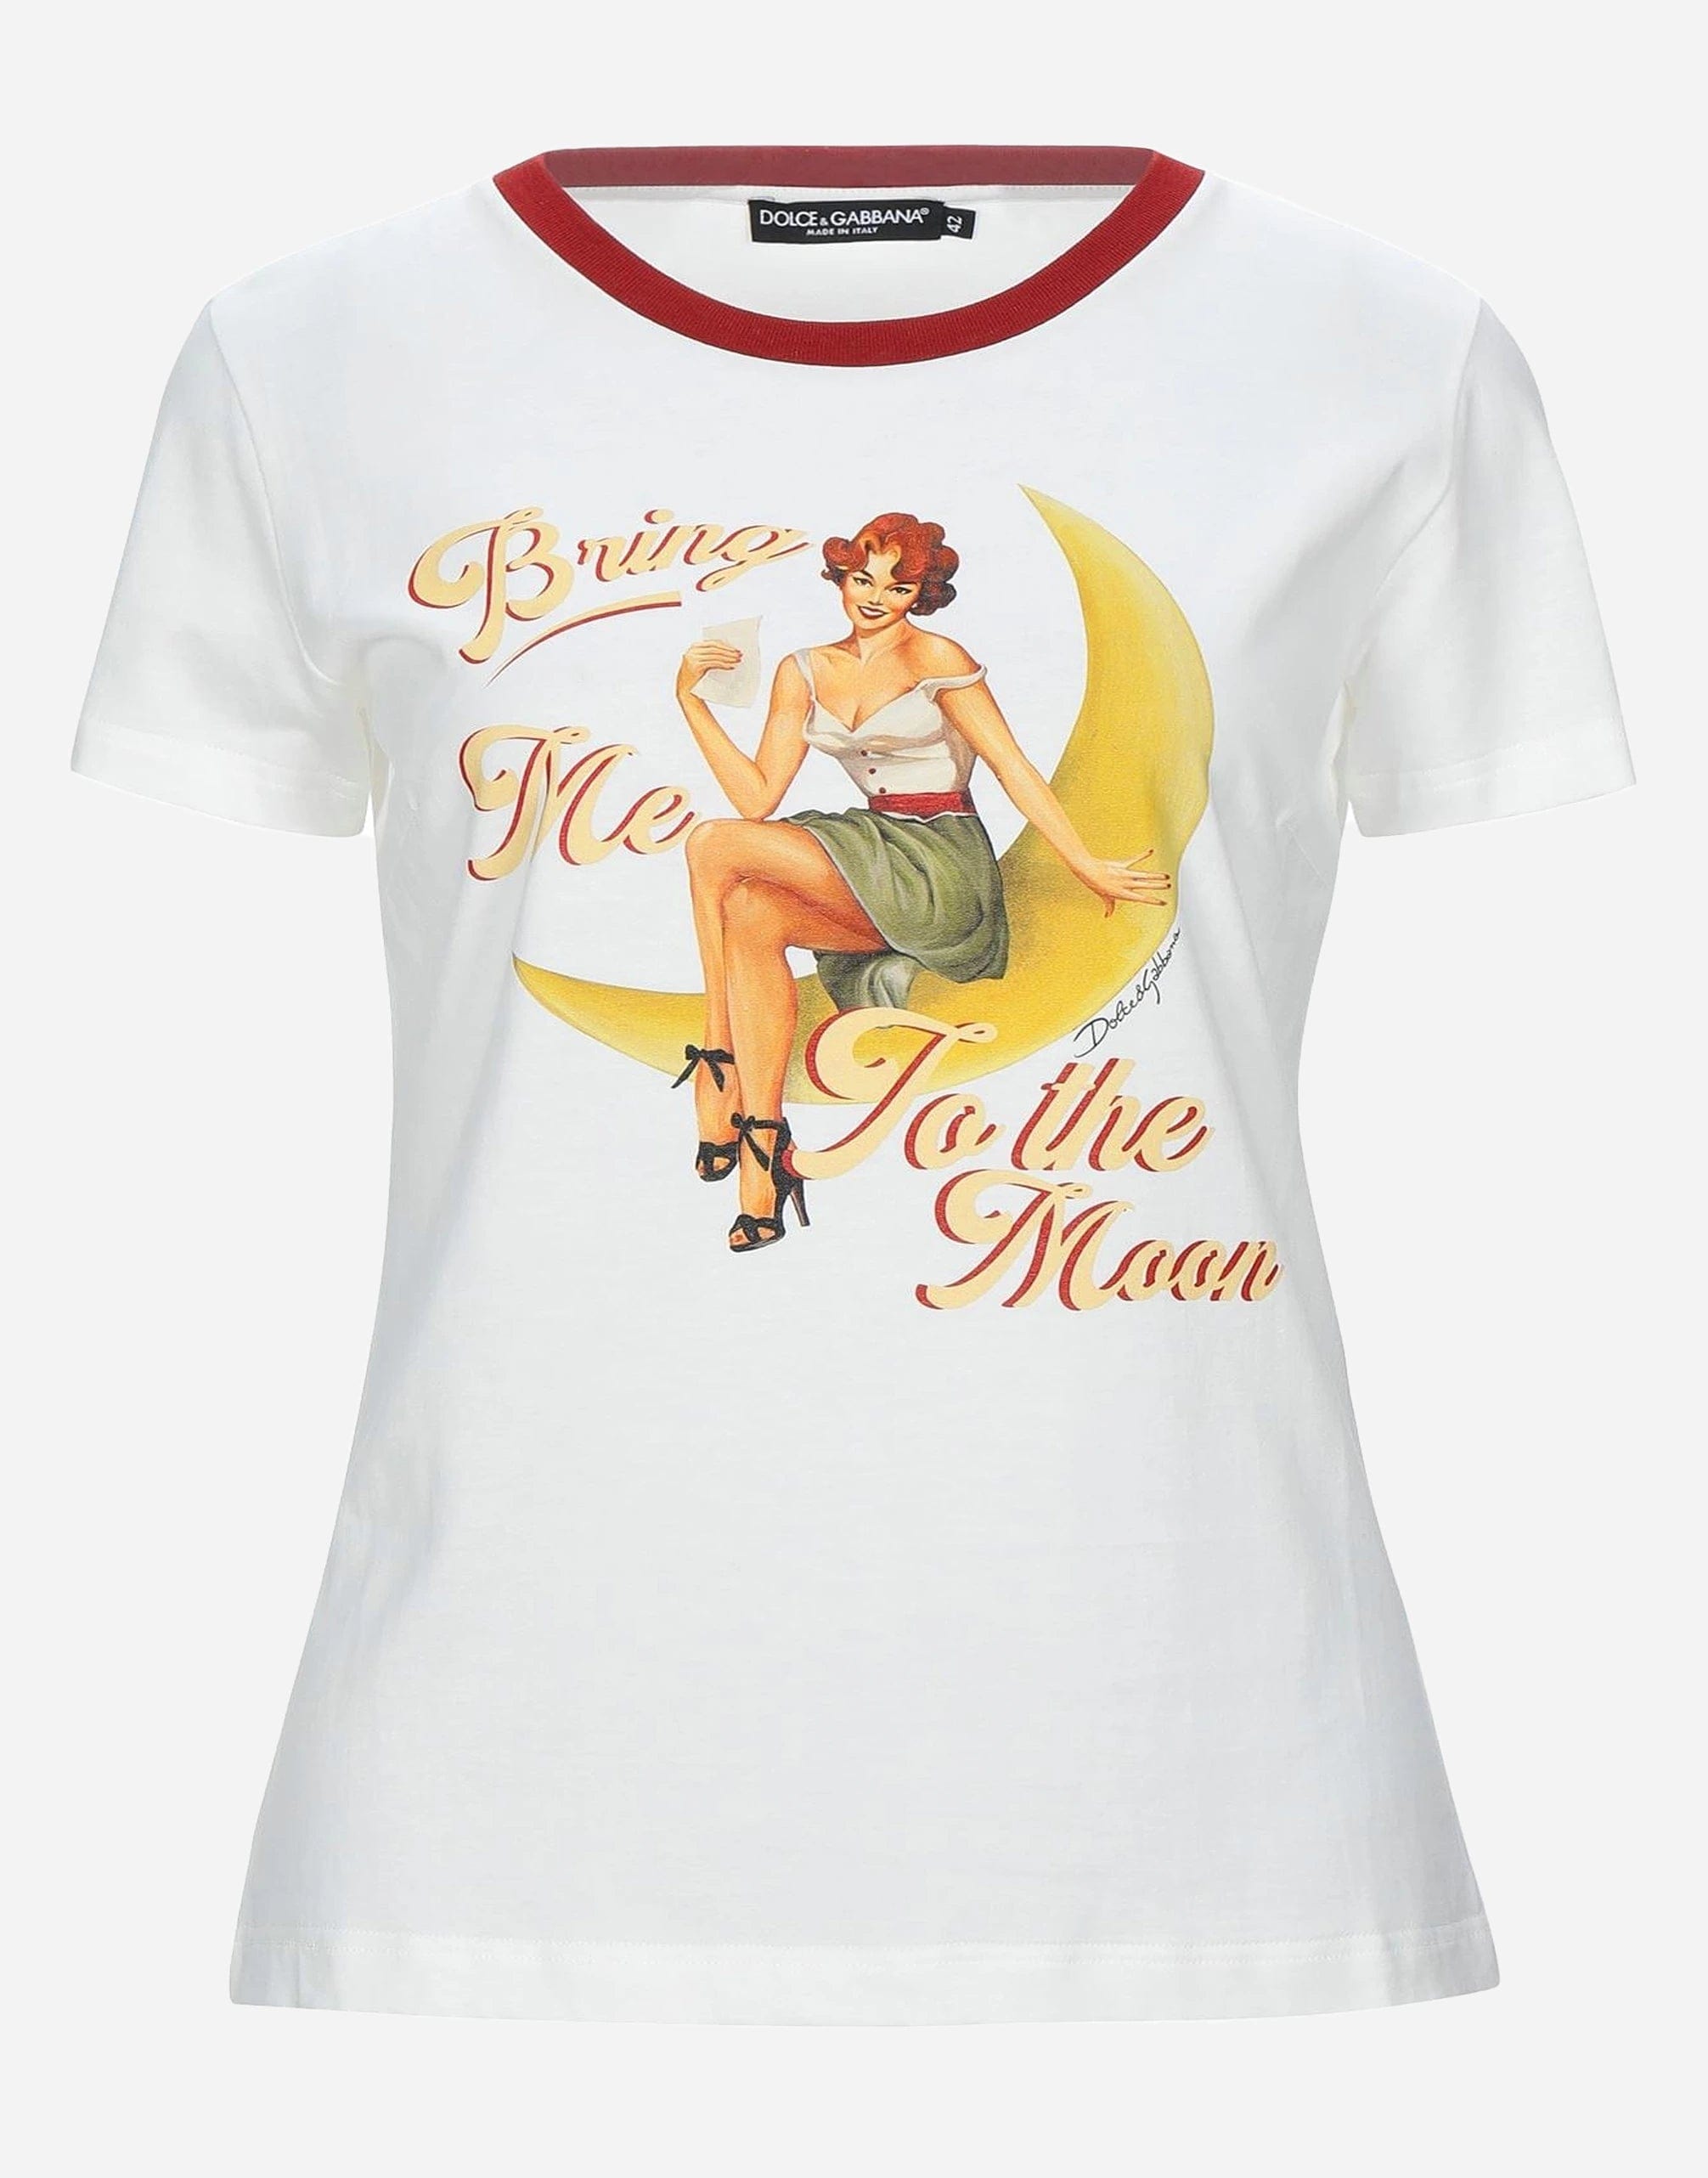 Dolce & Gabbana 'Bring Me To The Moon' T-Shirt